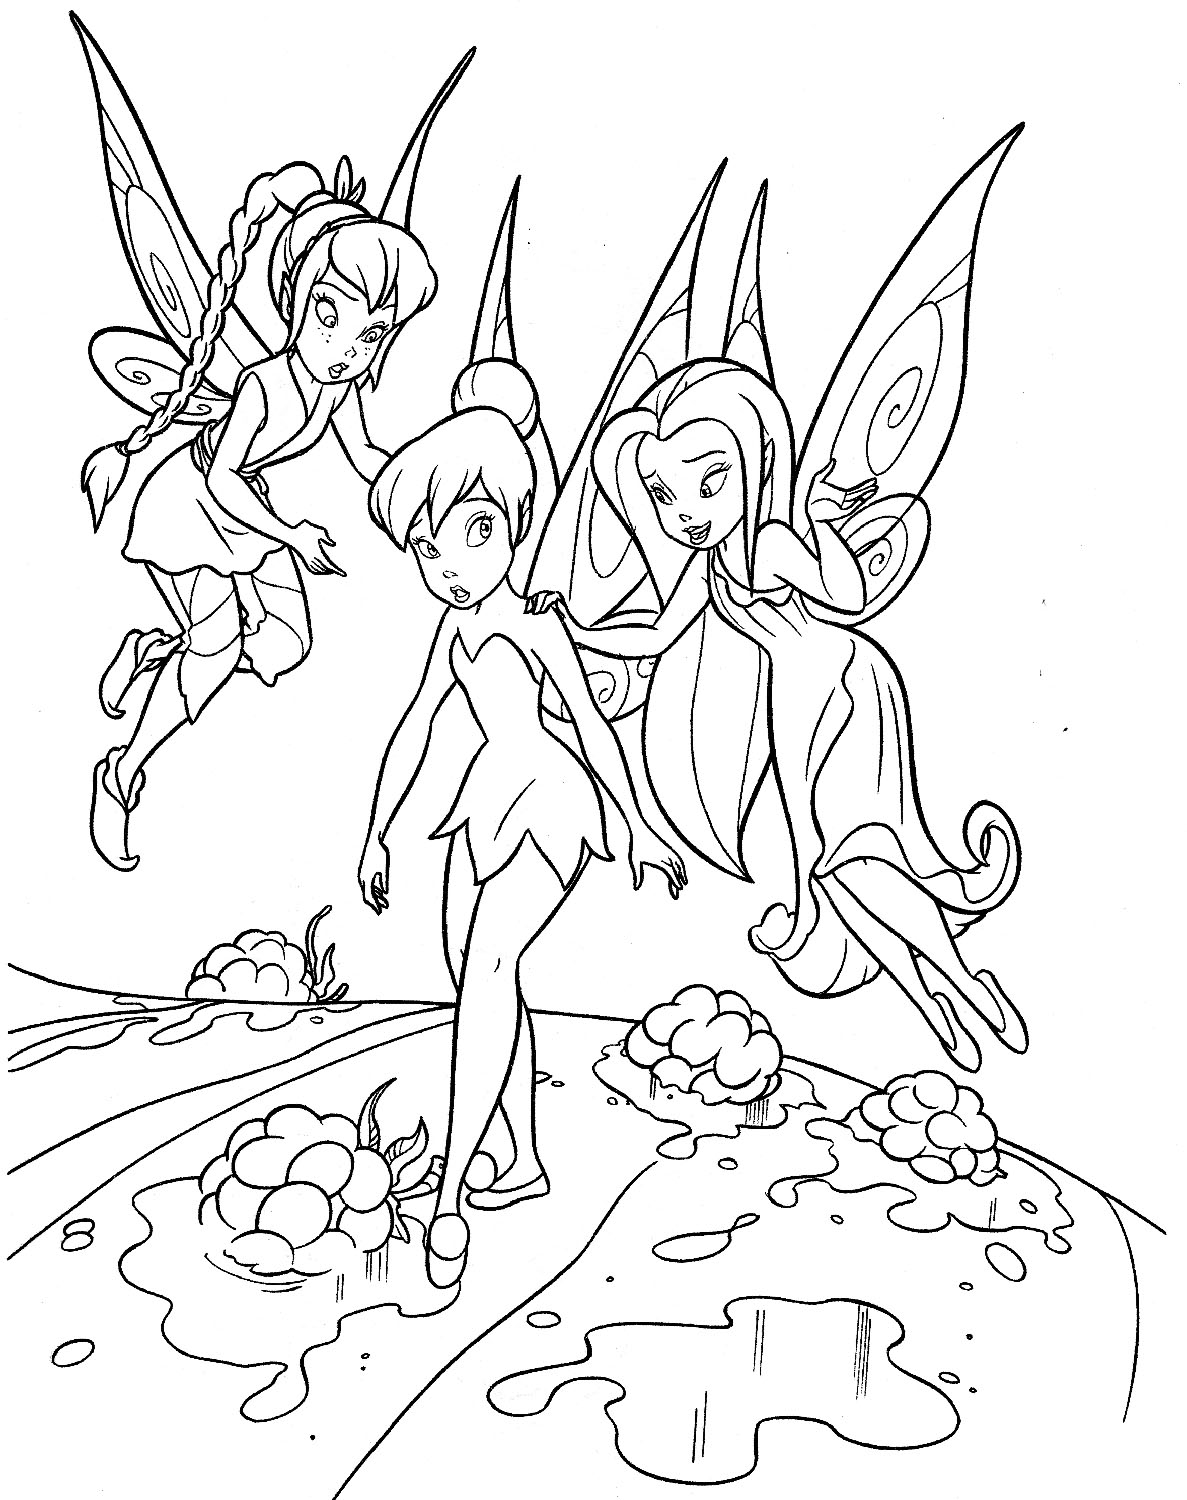 60-tinkerbell-birthday-party-ideas-tinkerbell-coloring-pages